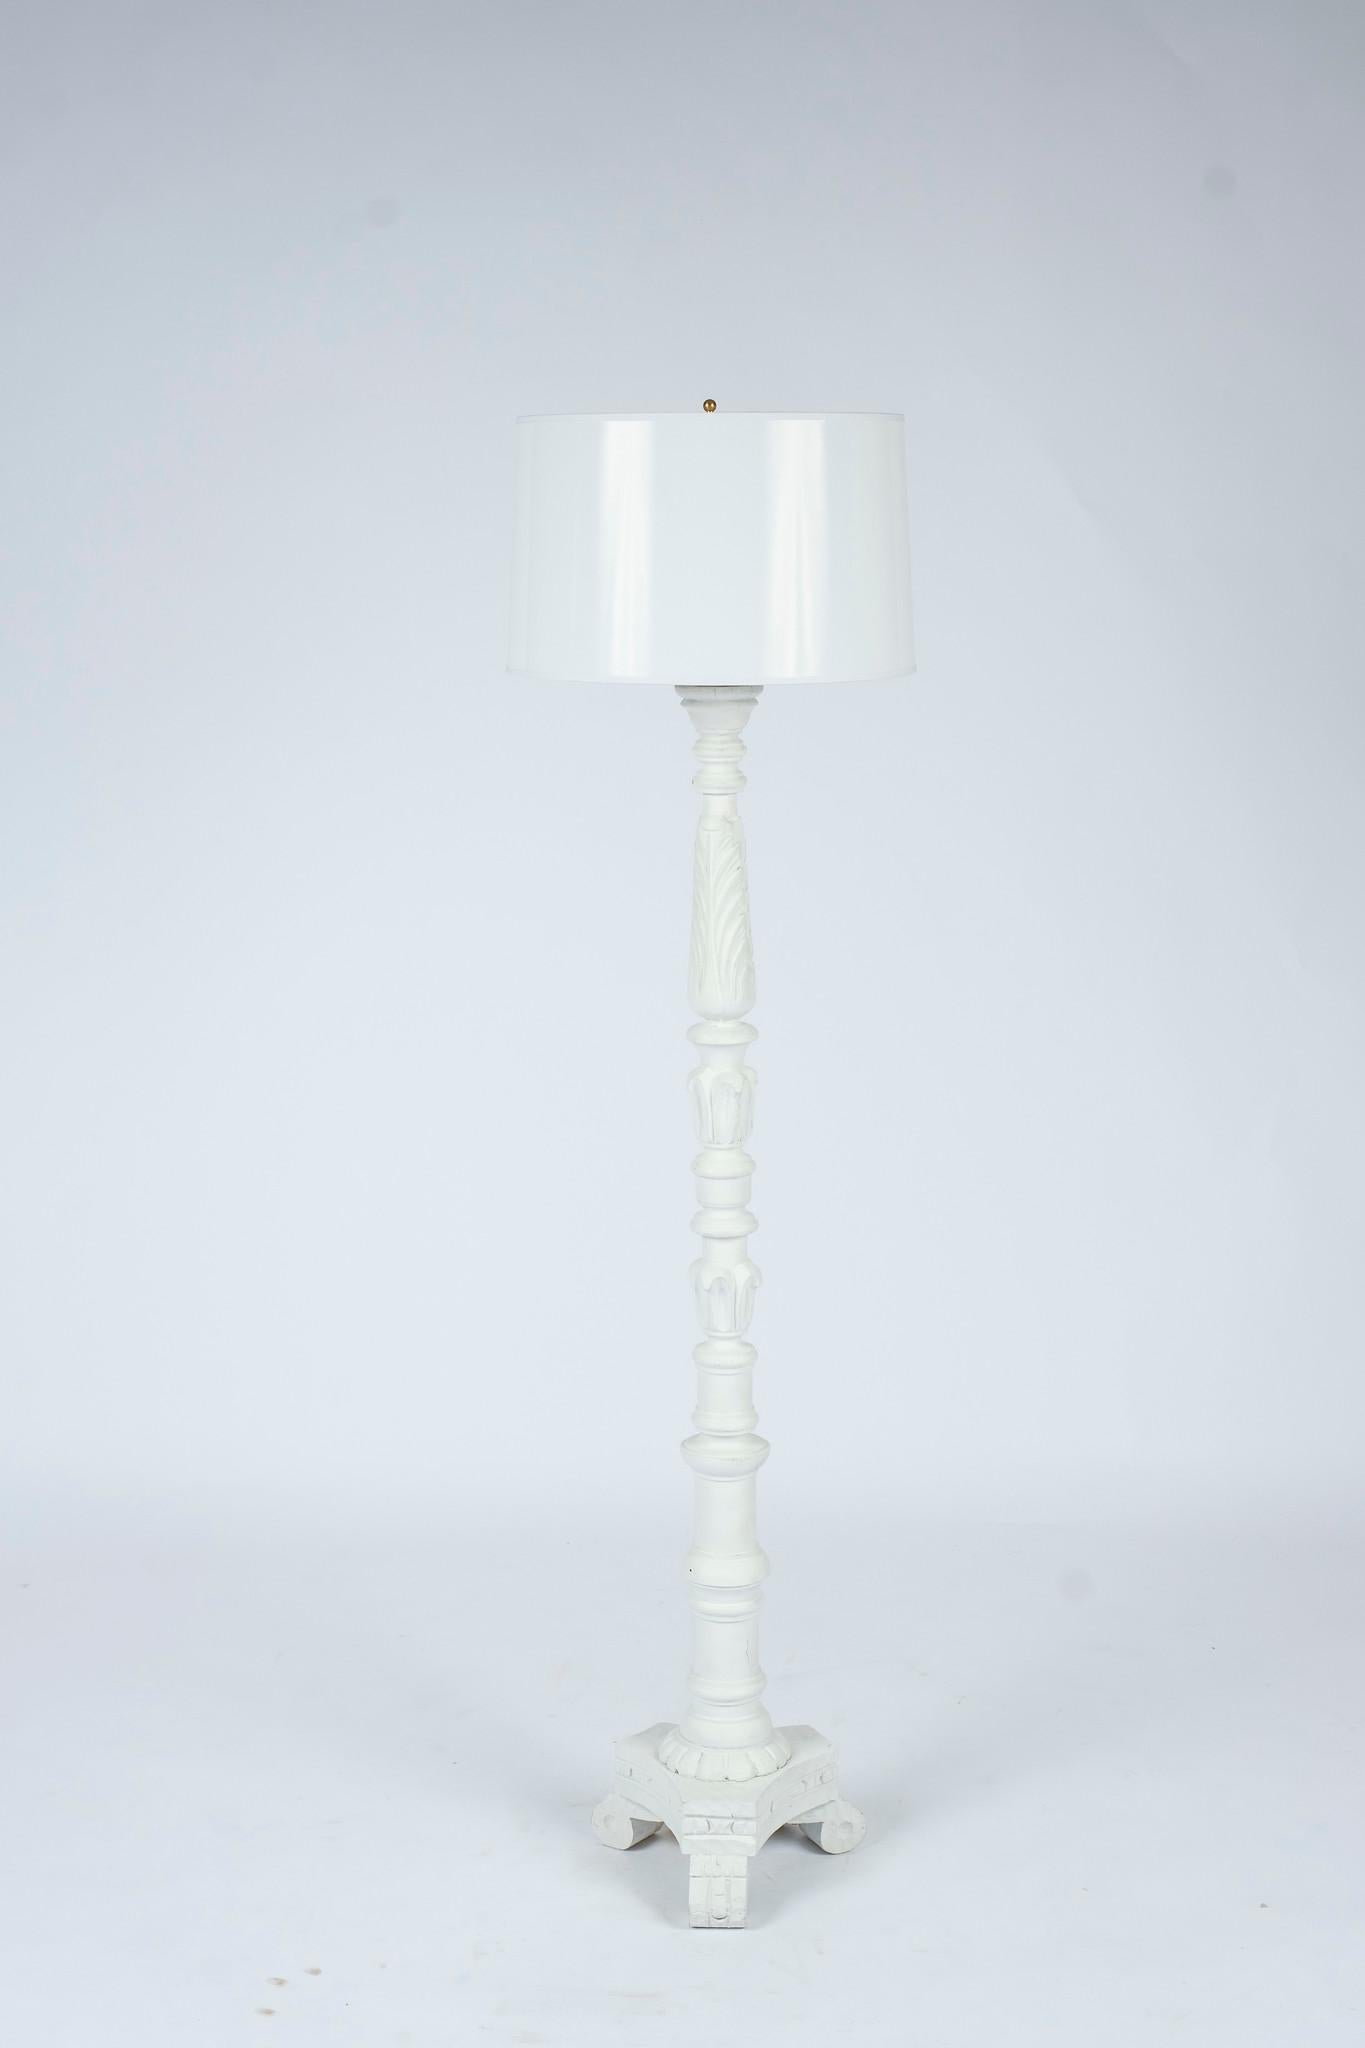 Vintage Italian gessoed carved floor lamps newly painted white in the style of Serge Roche shown with 16